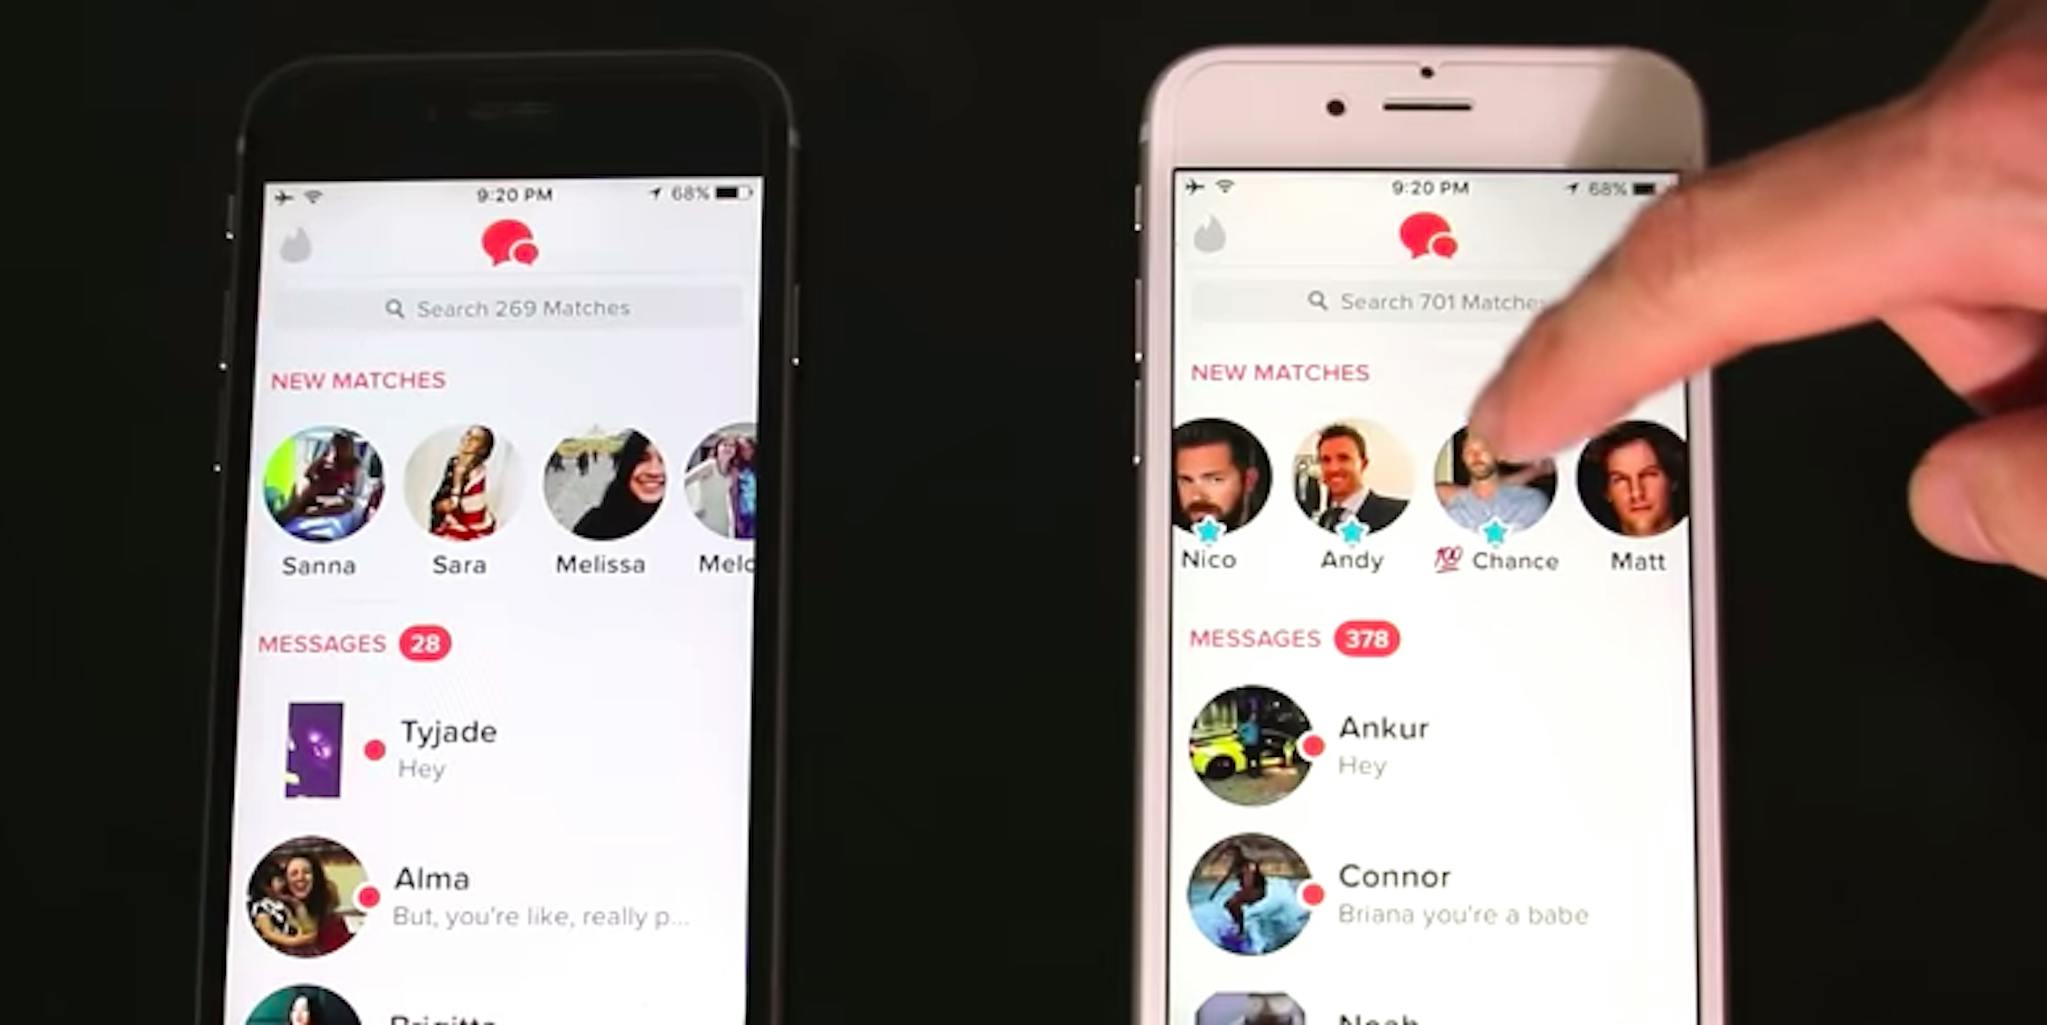 why is there so many bots on tinder